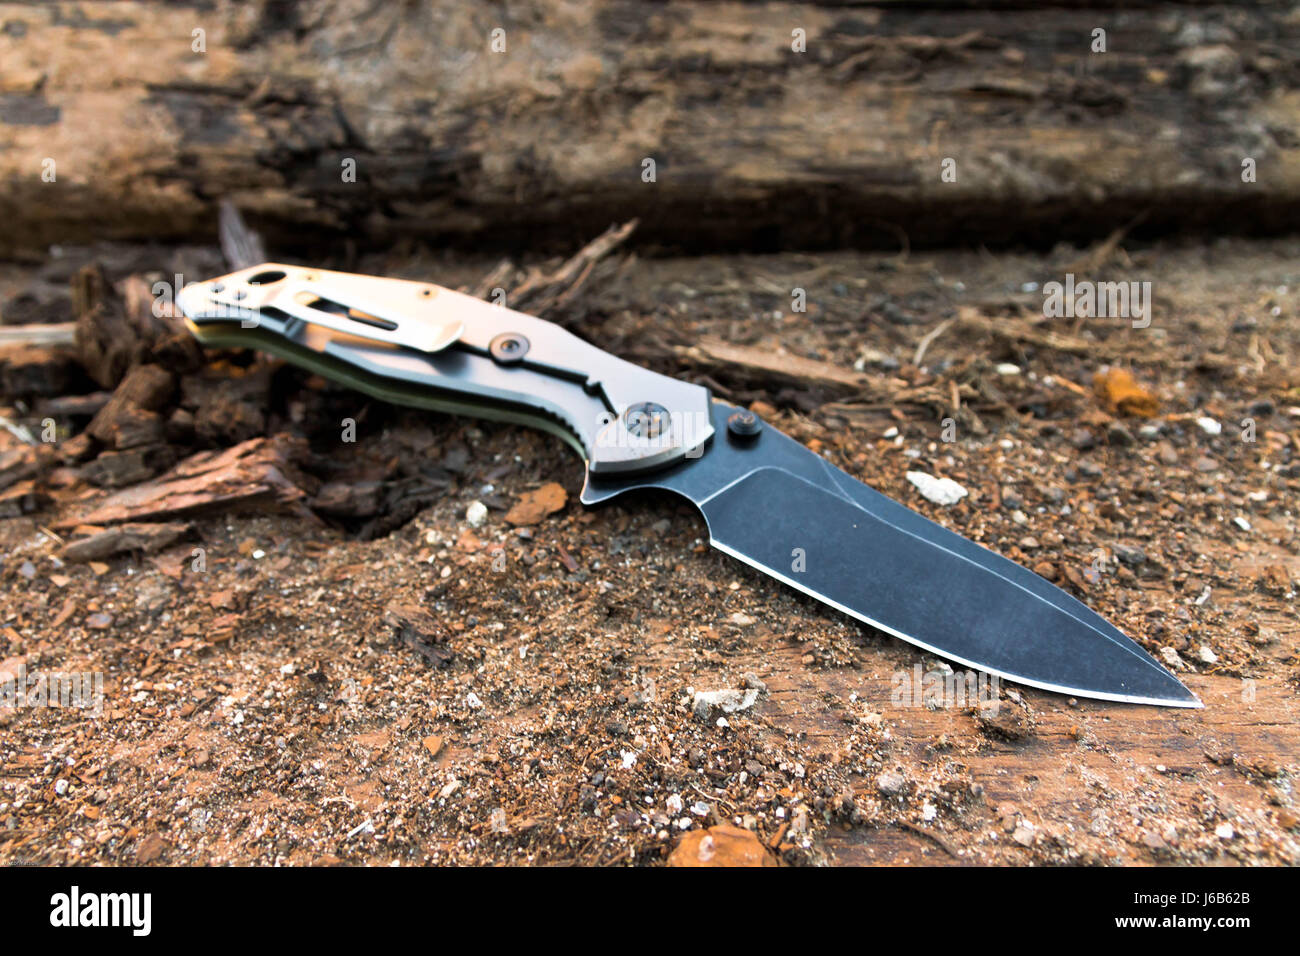 Tactical knife with a black blade on a background of brown wood. Stock Photo